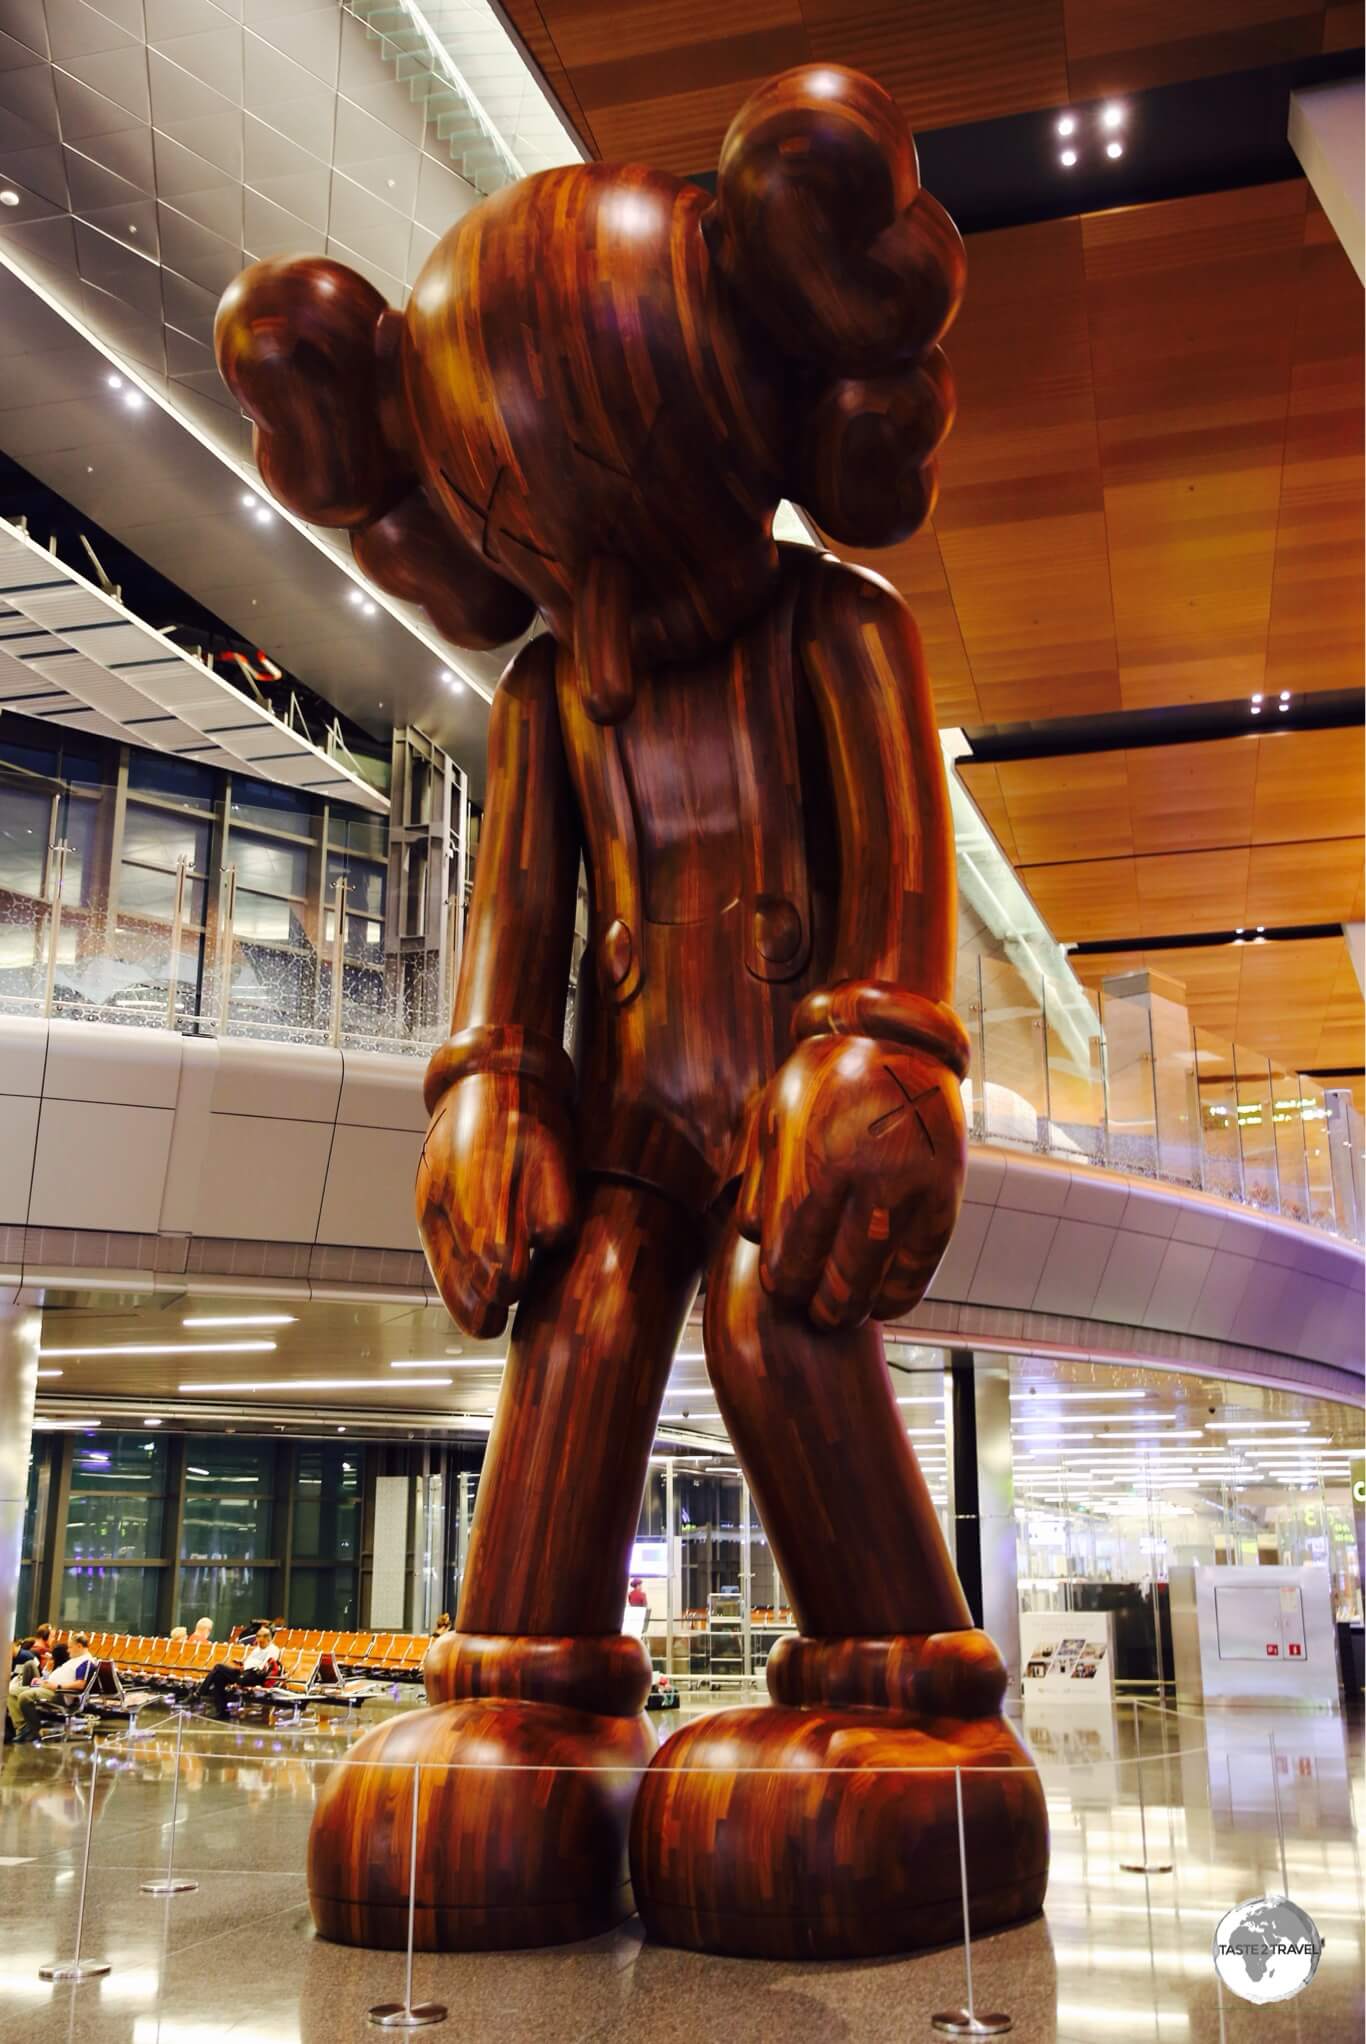 The latest artwork to be installed at HIA, the 32 feet tall 'Small Lie' is the work of American artist KAWS. 